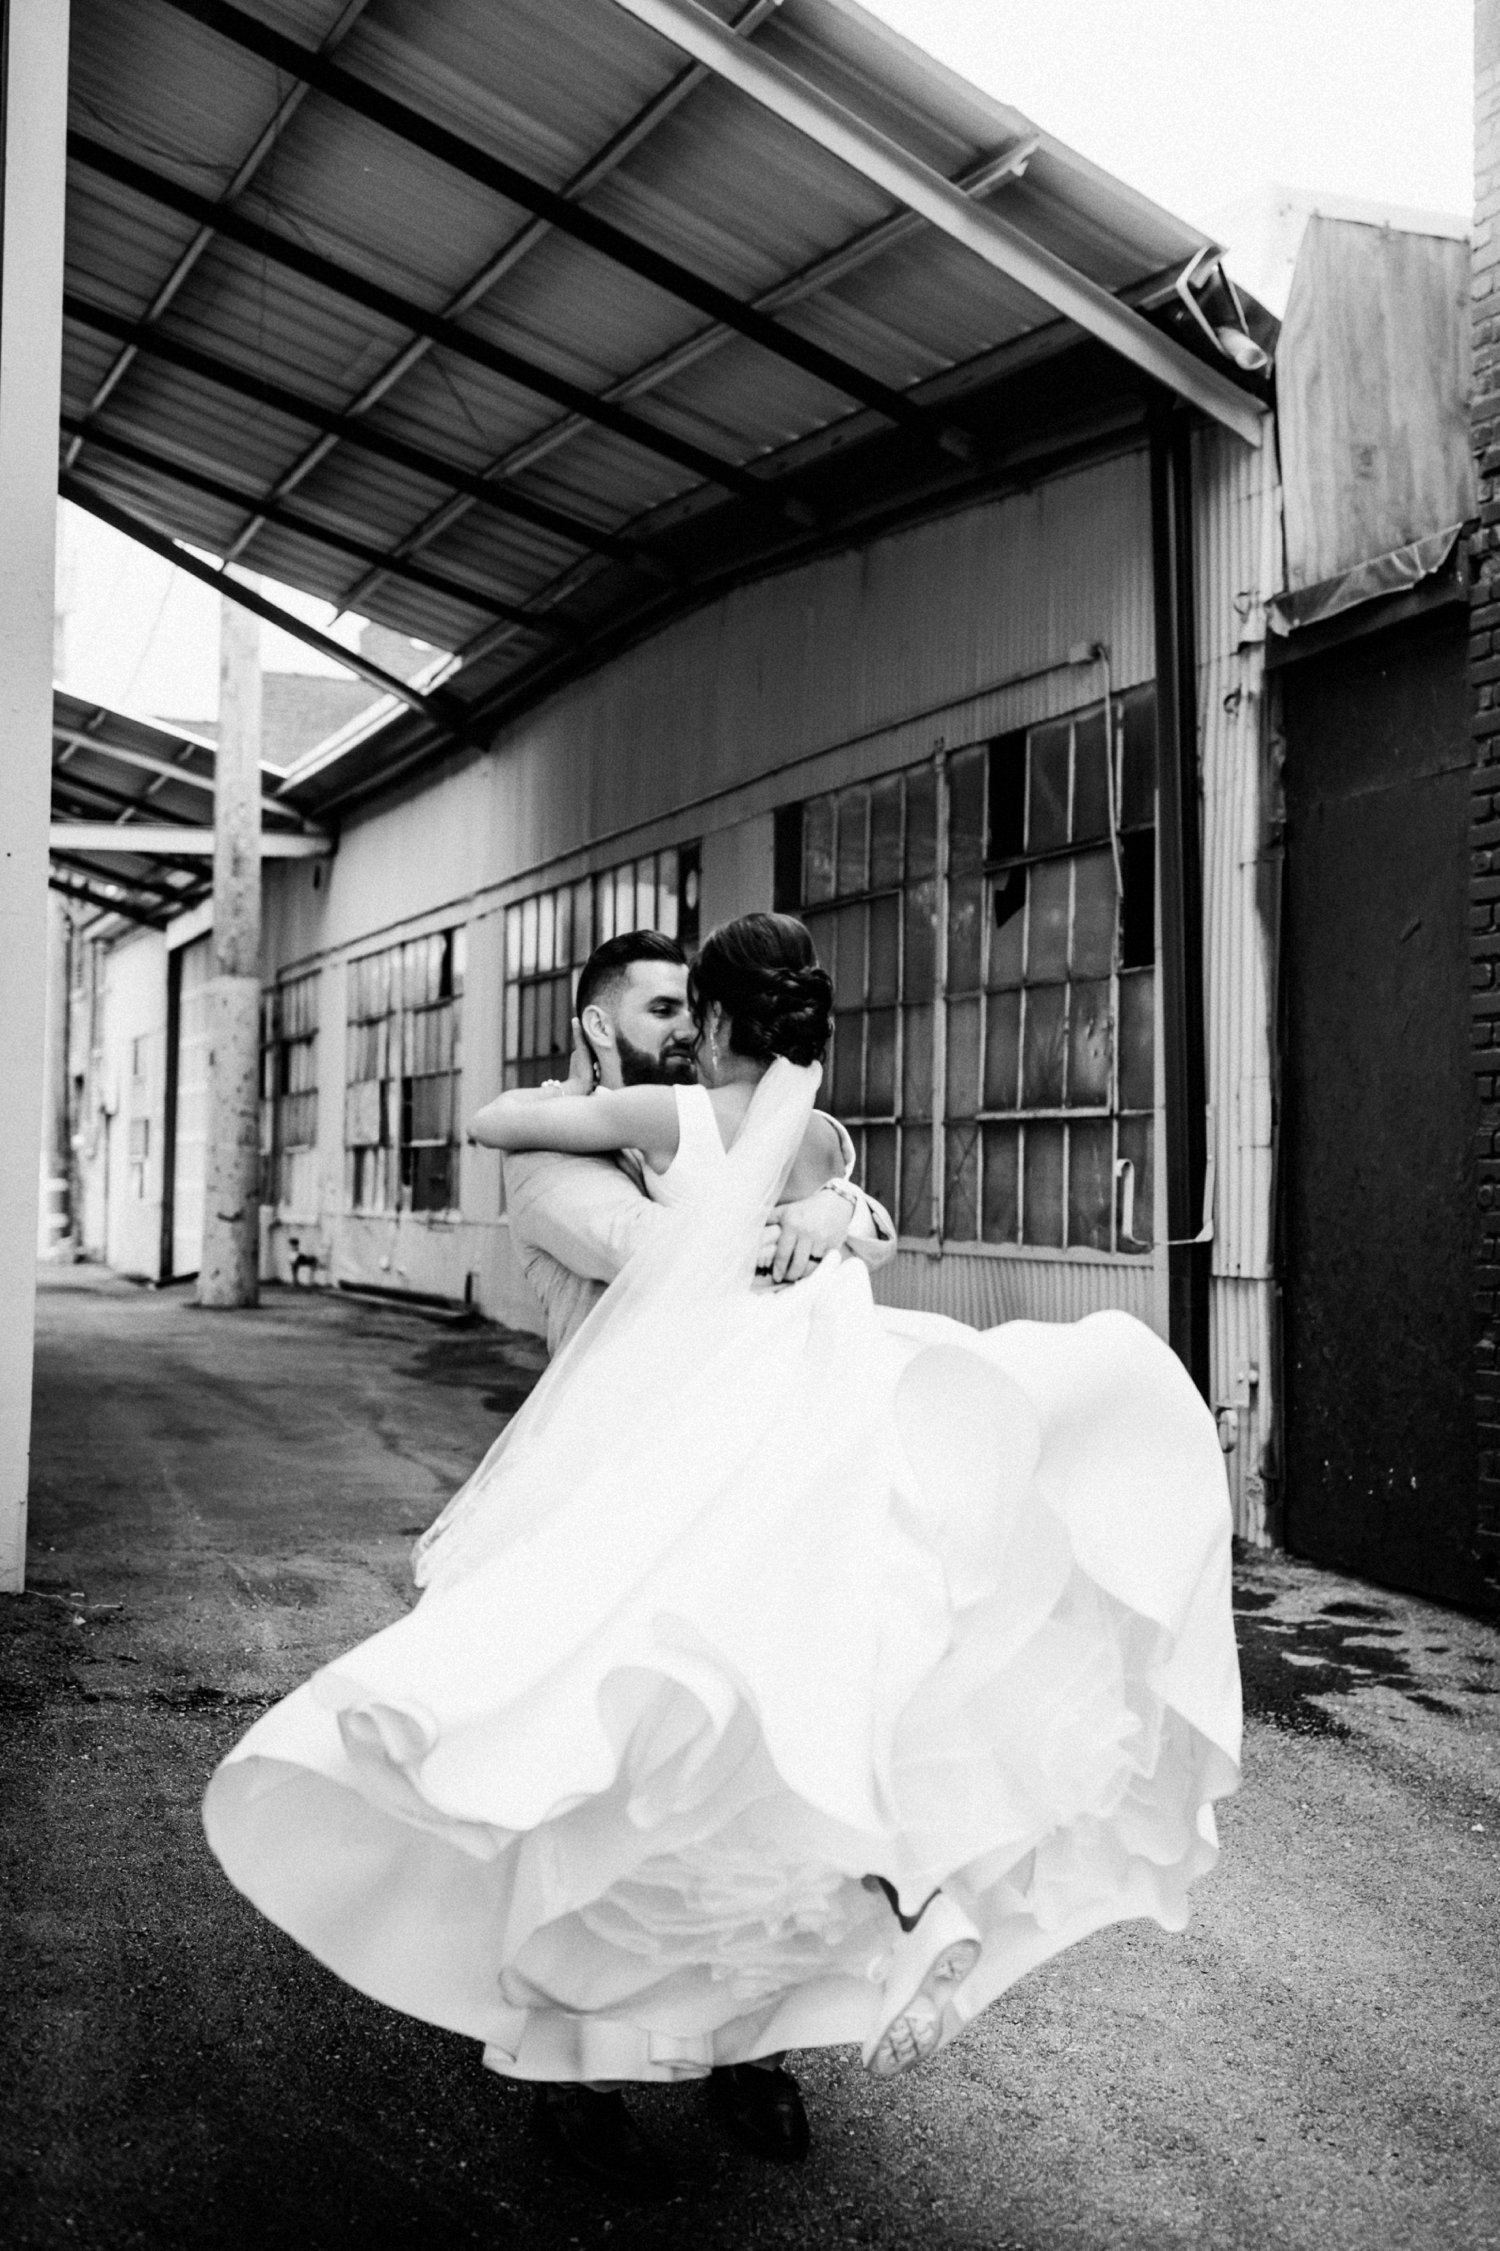  images by feliciathephotographer.com | destination wedding photographer | kansas city | spring time | couple portraits | white a line gown | david's bridal | grey suit | the black tux | up do | kiss | true love | industrial | modern | pearl bracelet | diamond teardrop earrings | black and white | jared | twirl | 